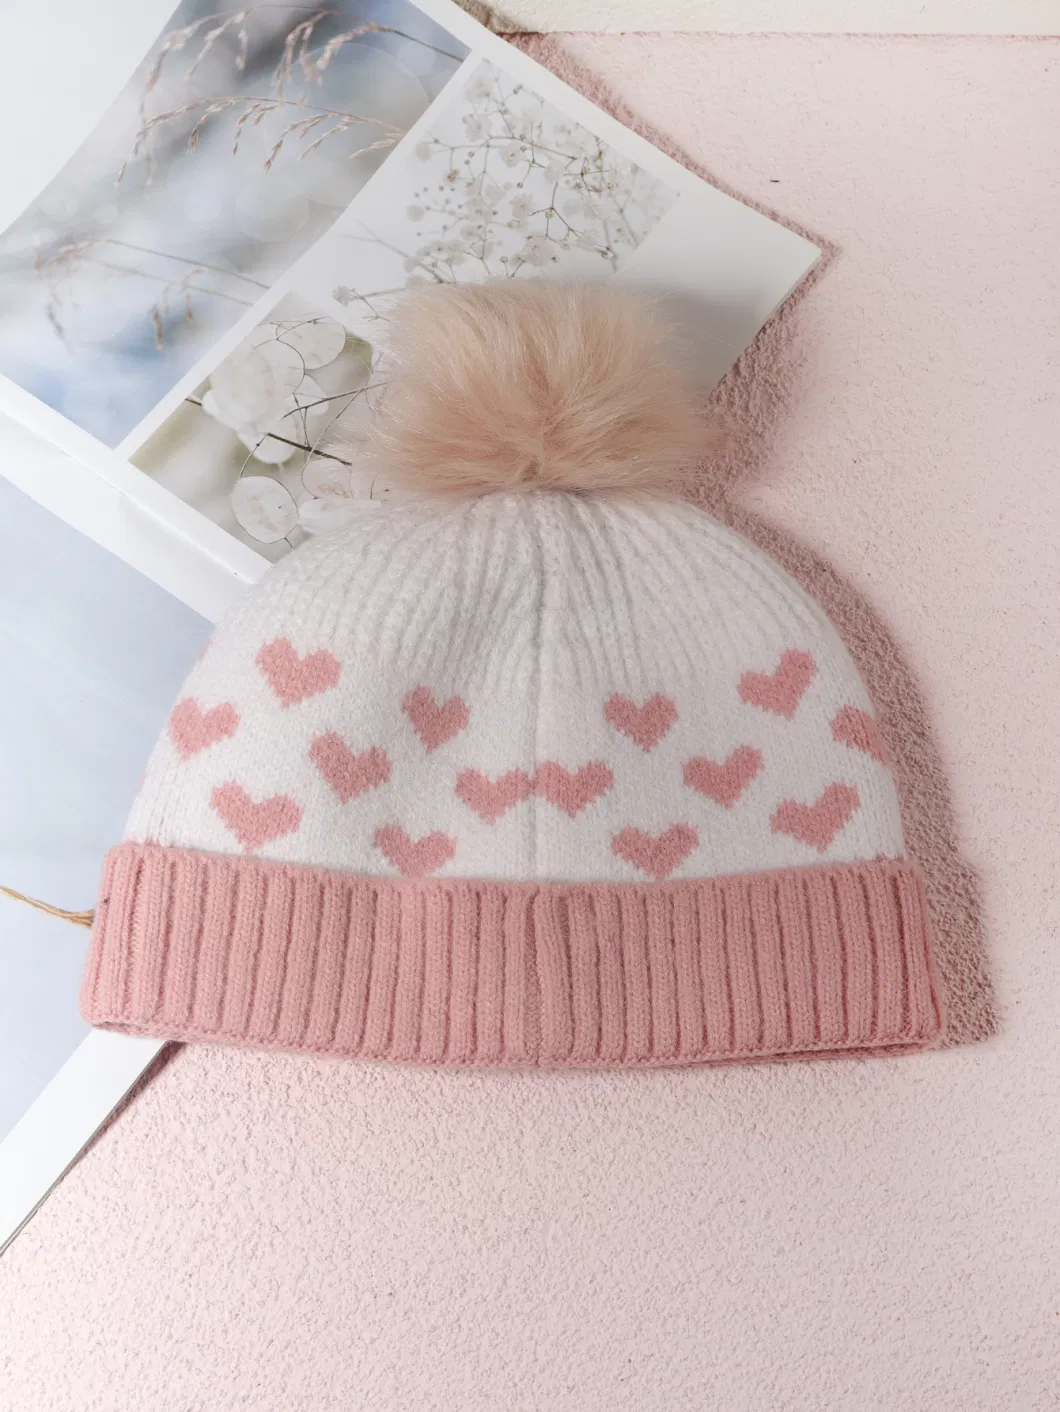 Customize Wool Cap Pink Black Heart Pattern Knitted POM Poms Beanie Hats